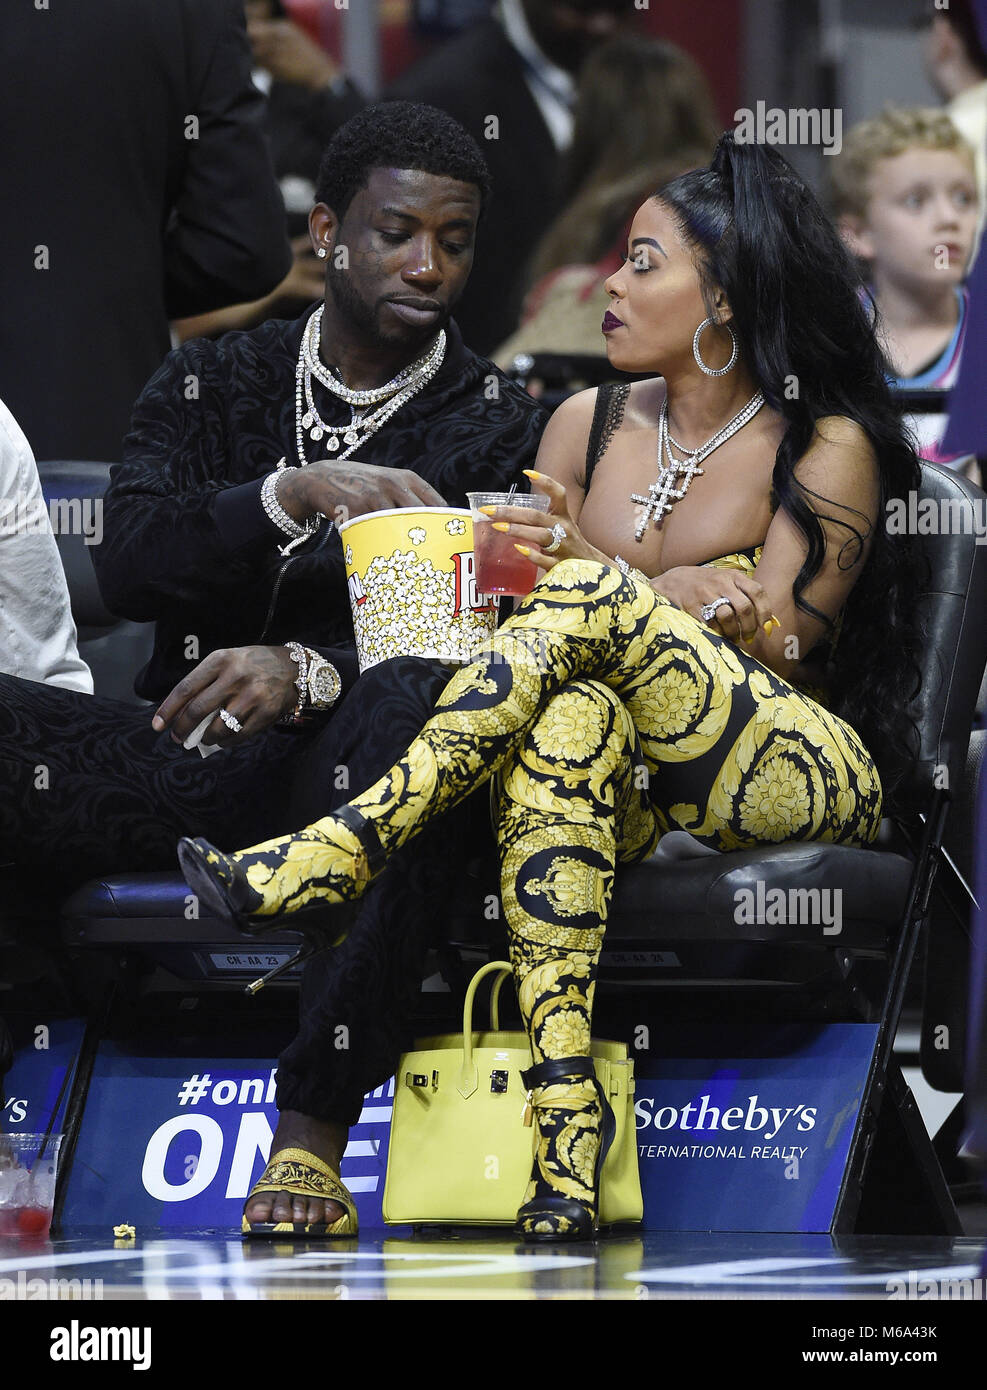 Miami, FL, USA. 01st Mar, 2018. Rapper Gucci Mane and his wife Keyshia  Ka'Oir watch the Los Angeles Lakers against the Miami Heat NBA game at the  AmericanAirlines Arena on March 1